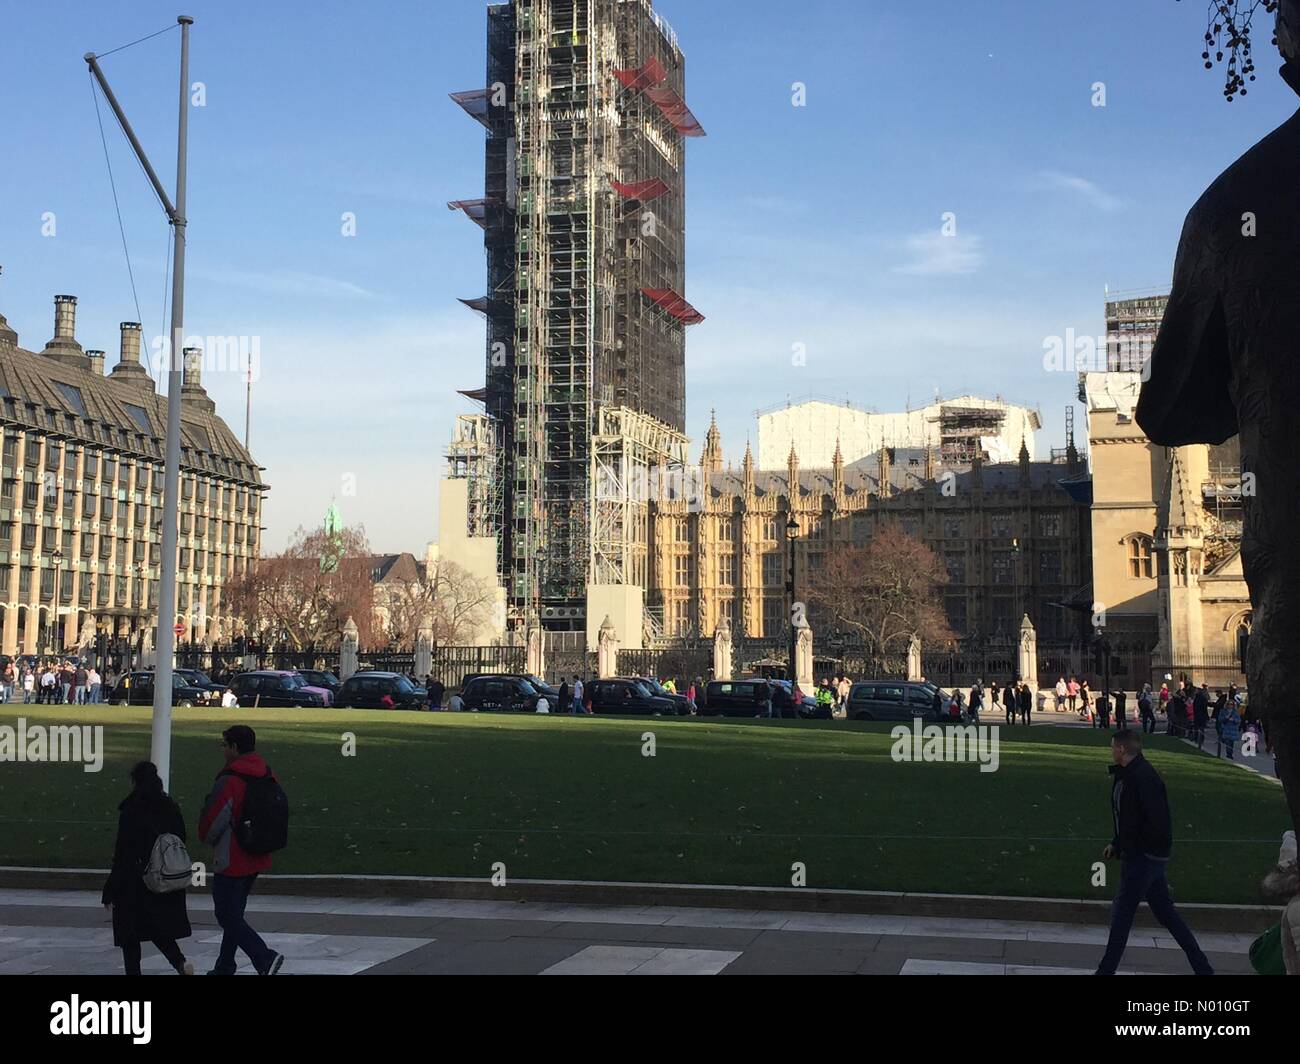 Parliament Square, London, UK. 22nd Feb 2019. London black cab drivers protest proposed changes to their licence Credit: Bridget1/StockimoNews/Alamy Live News Stock Photo